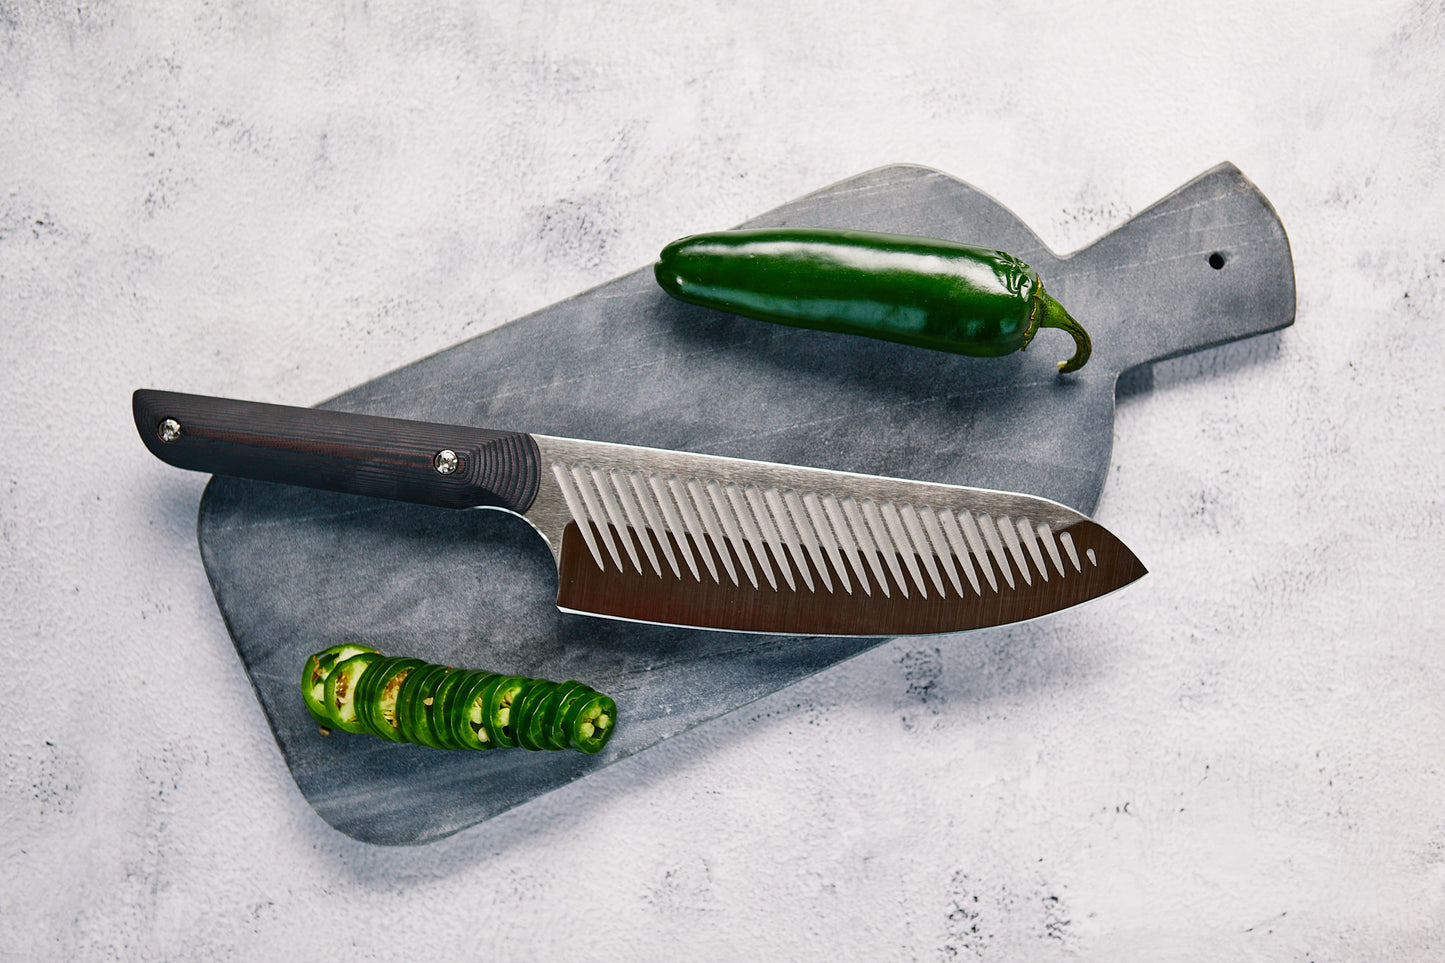 The Halsted Serene Chef Knife